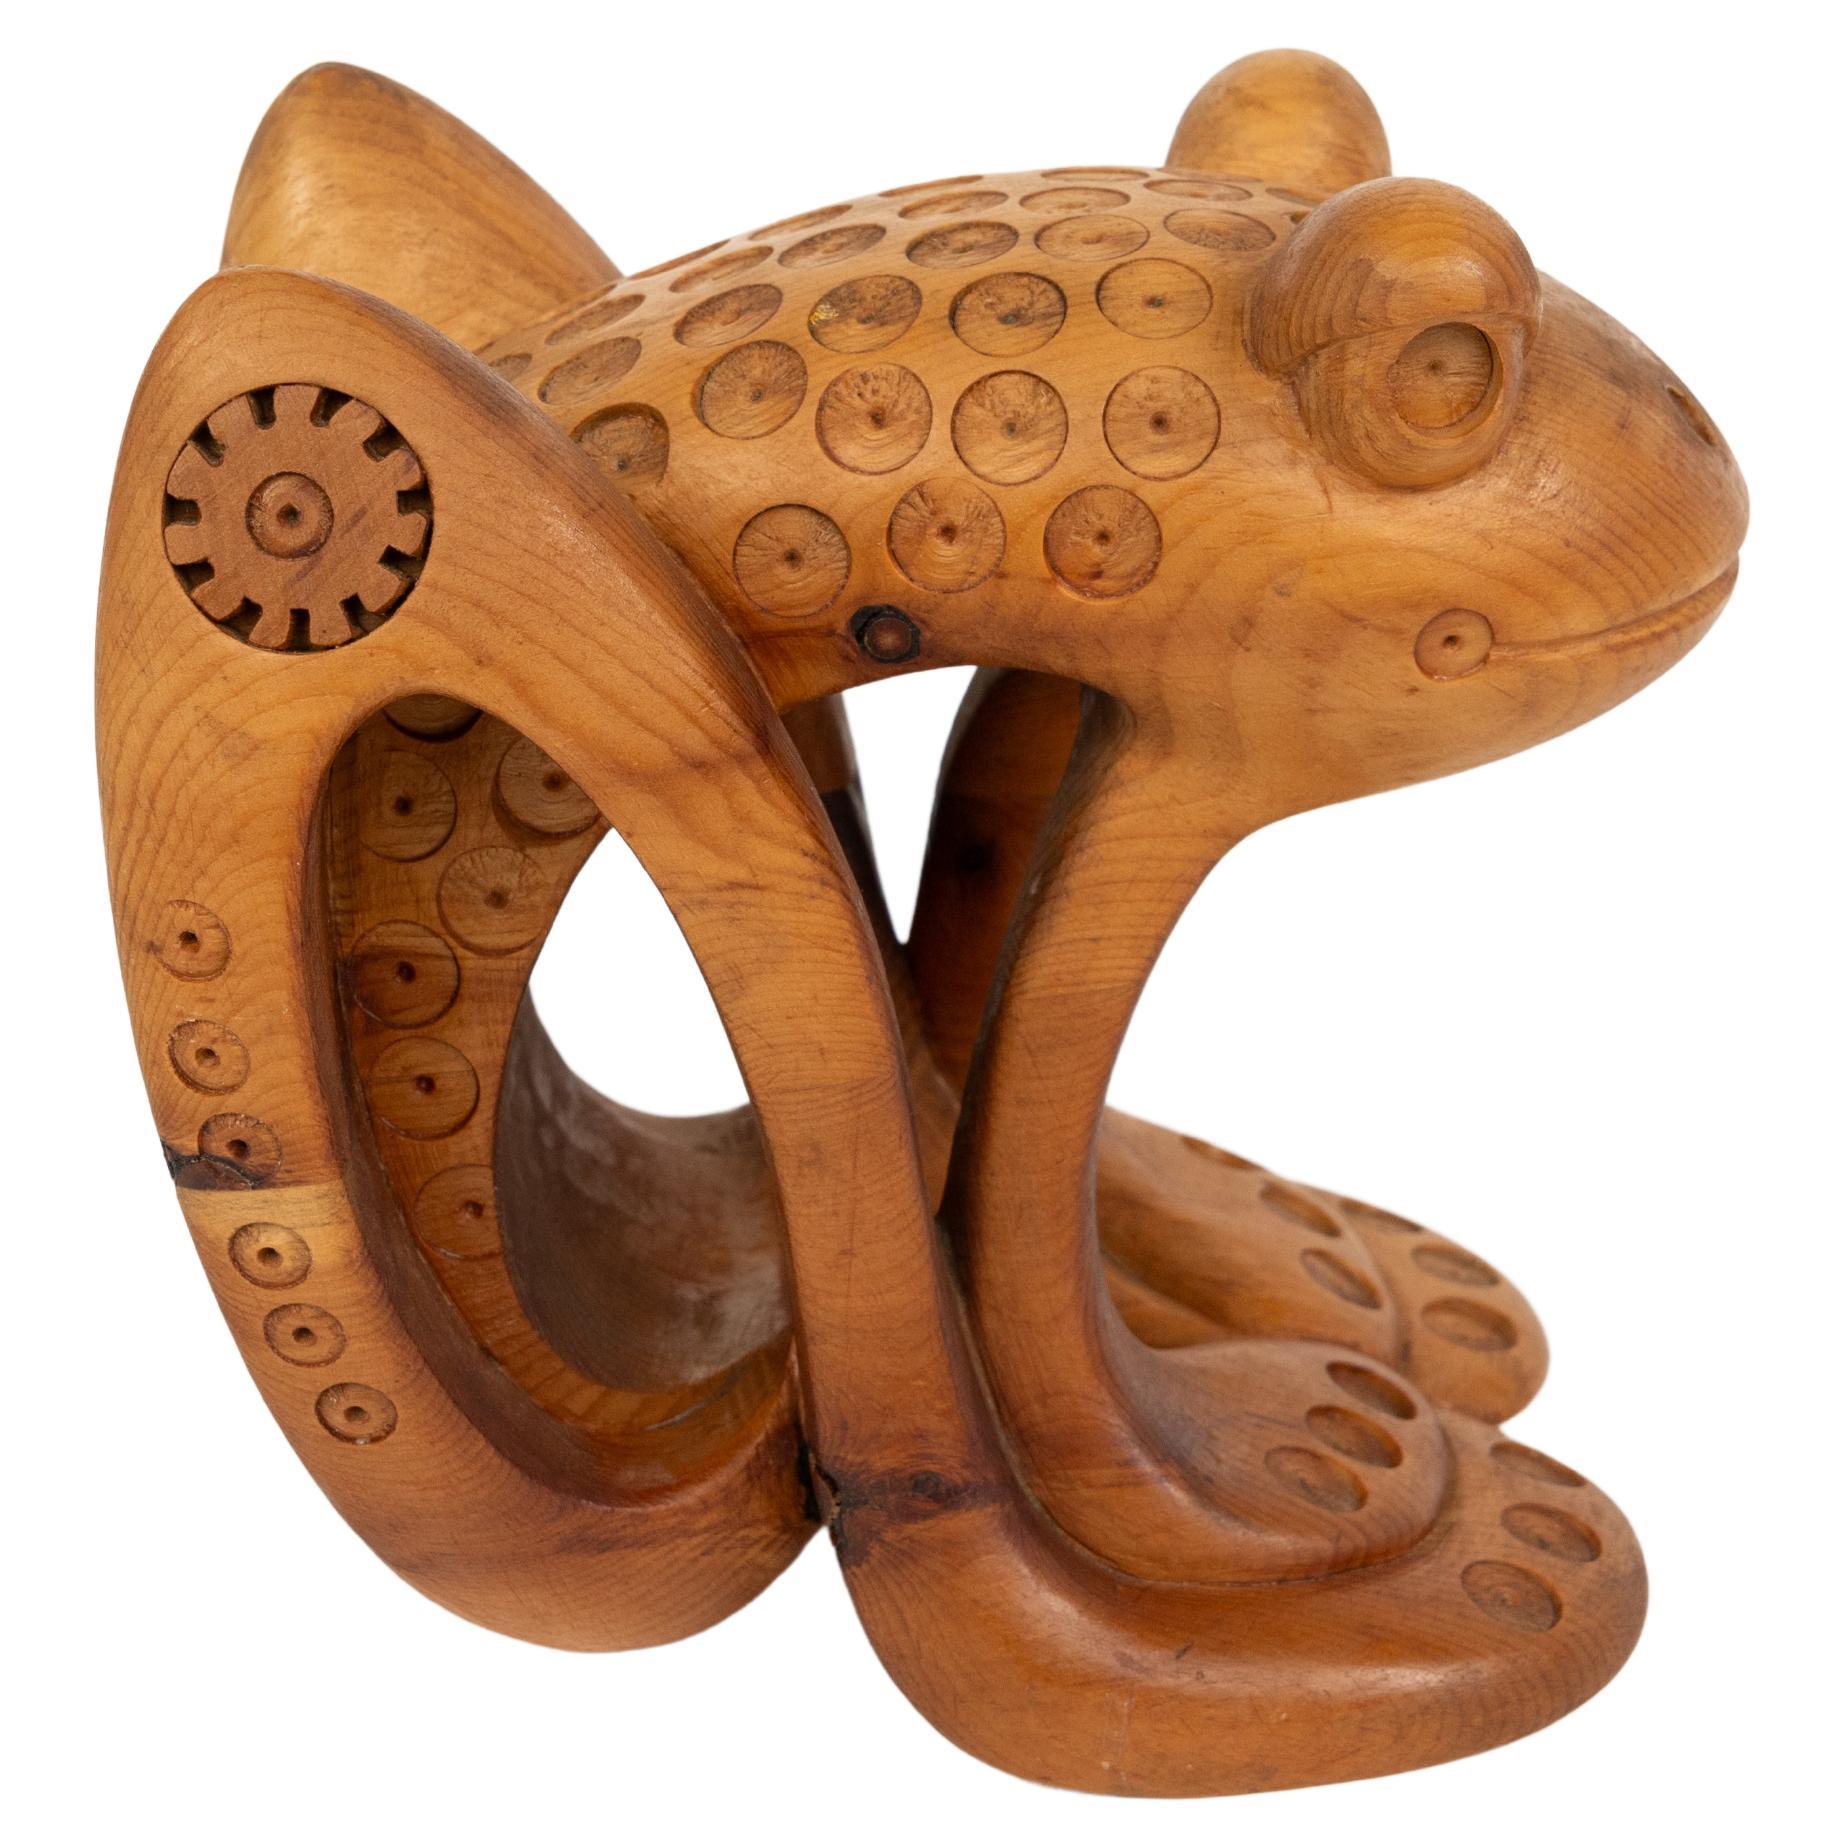 Pine Wood Decorative Sculpture Shape Frog by Ferdinando Codognotto, Italy 2001 For Sale